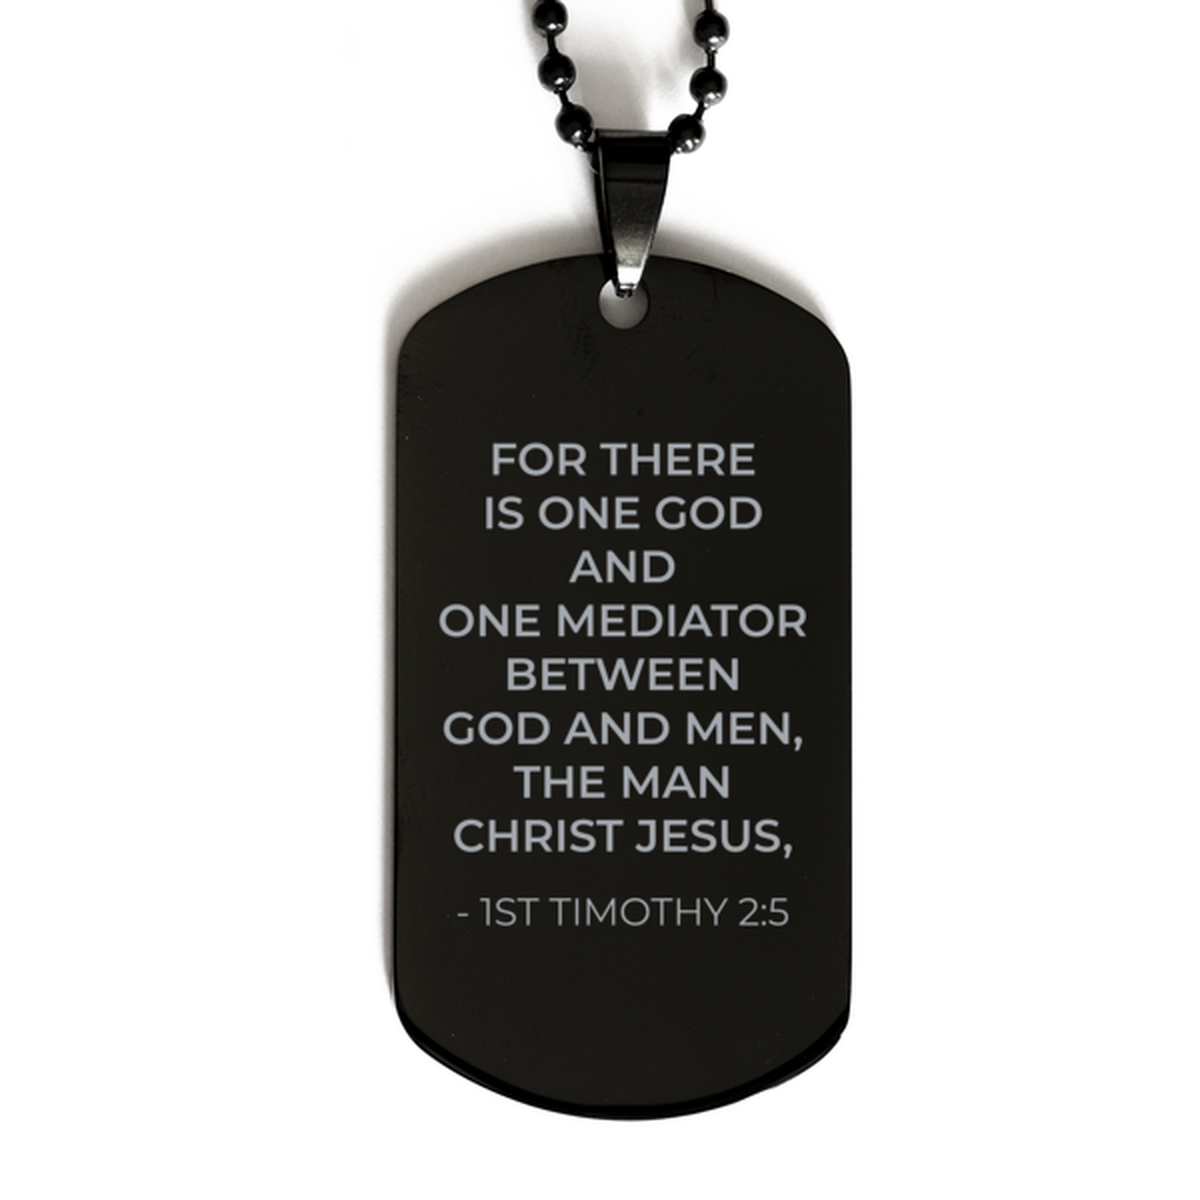 Bible Verse Black Dog Tag, 1St Timothy 2:5 For There Is One God And One Mediator, Christian Inspirational Necklace Gifts For Men Women